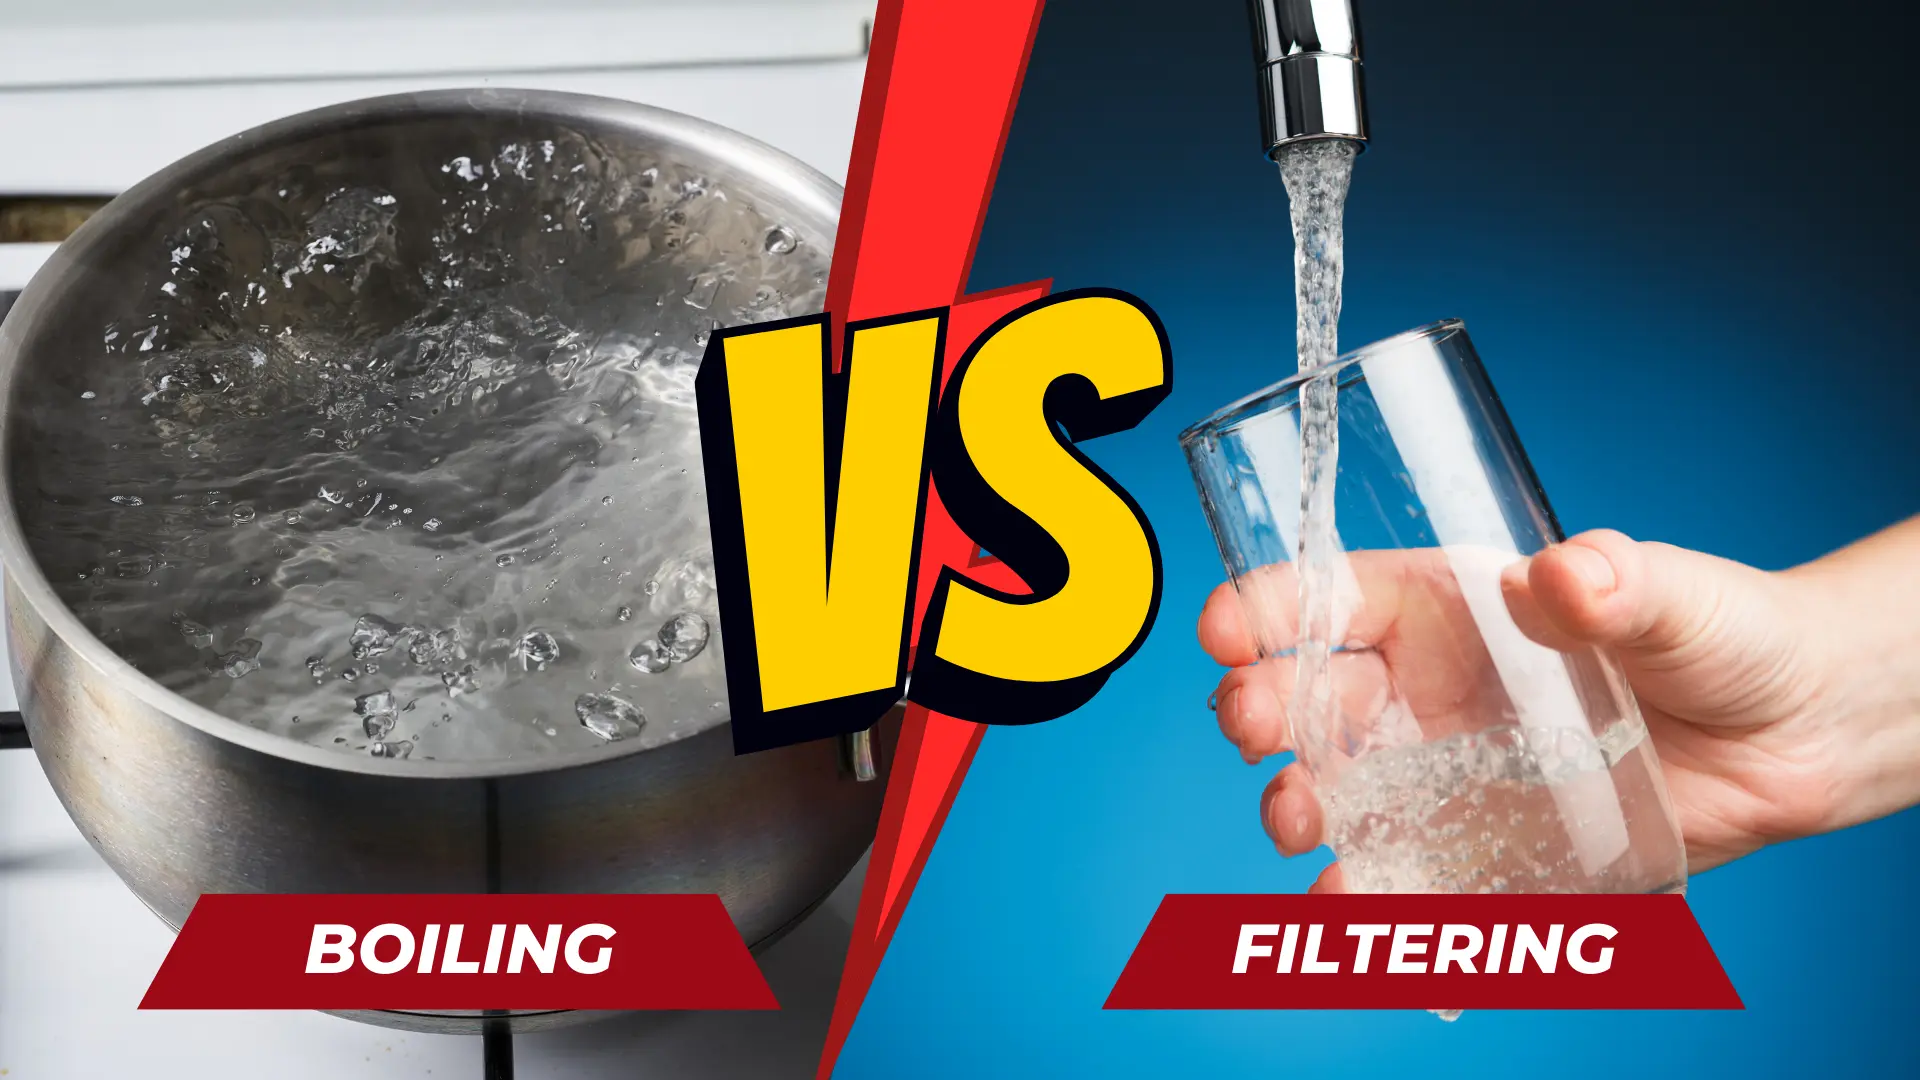 Boiling or Filtering